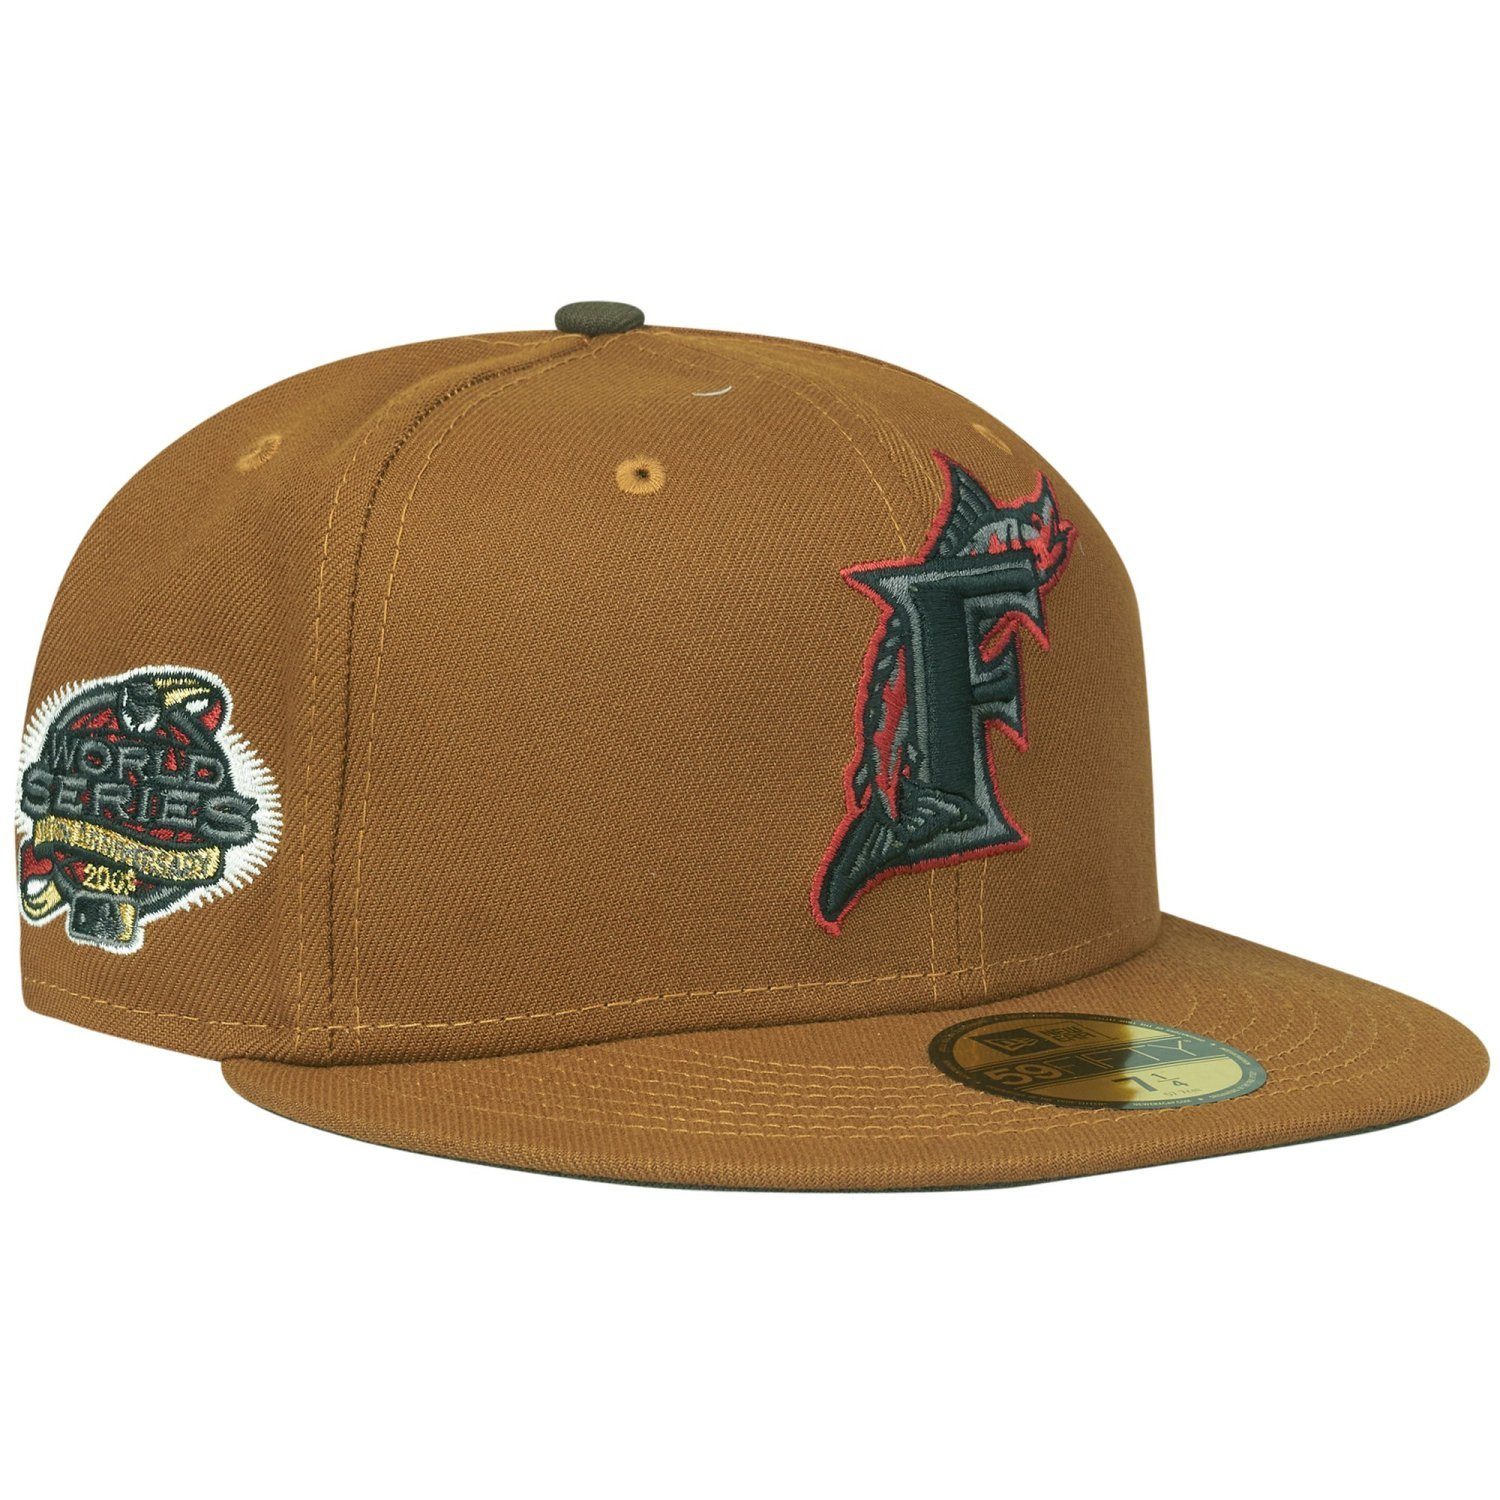 New Era Fitted Cap 59Fifty WORLD SERIES Marlins 2003 Florida